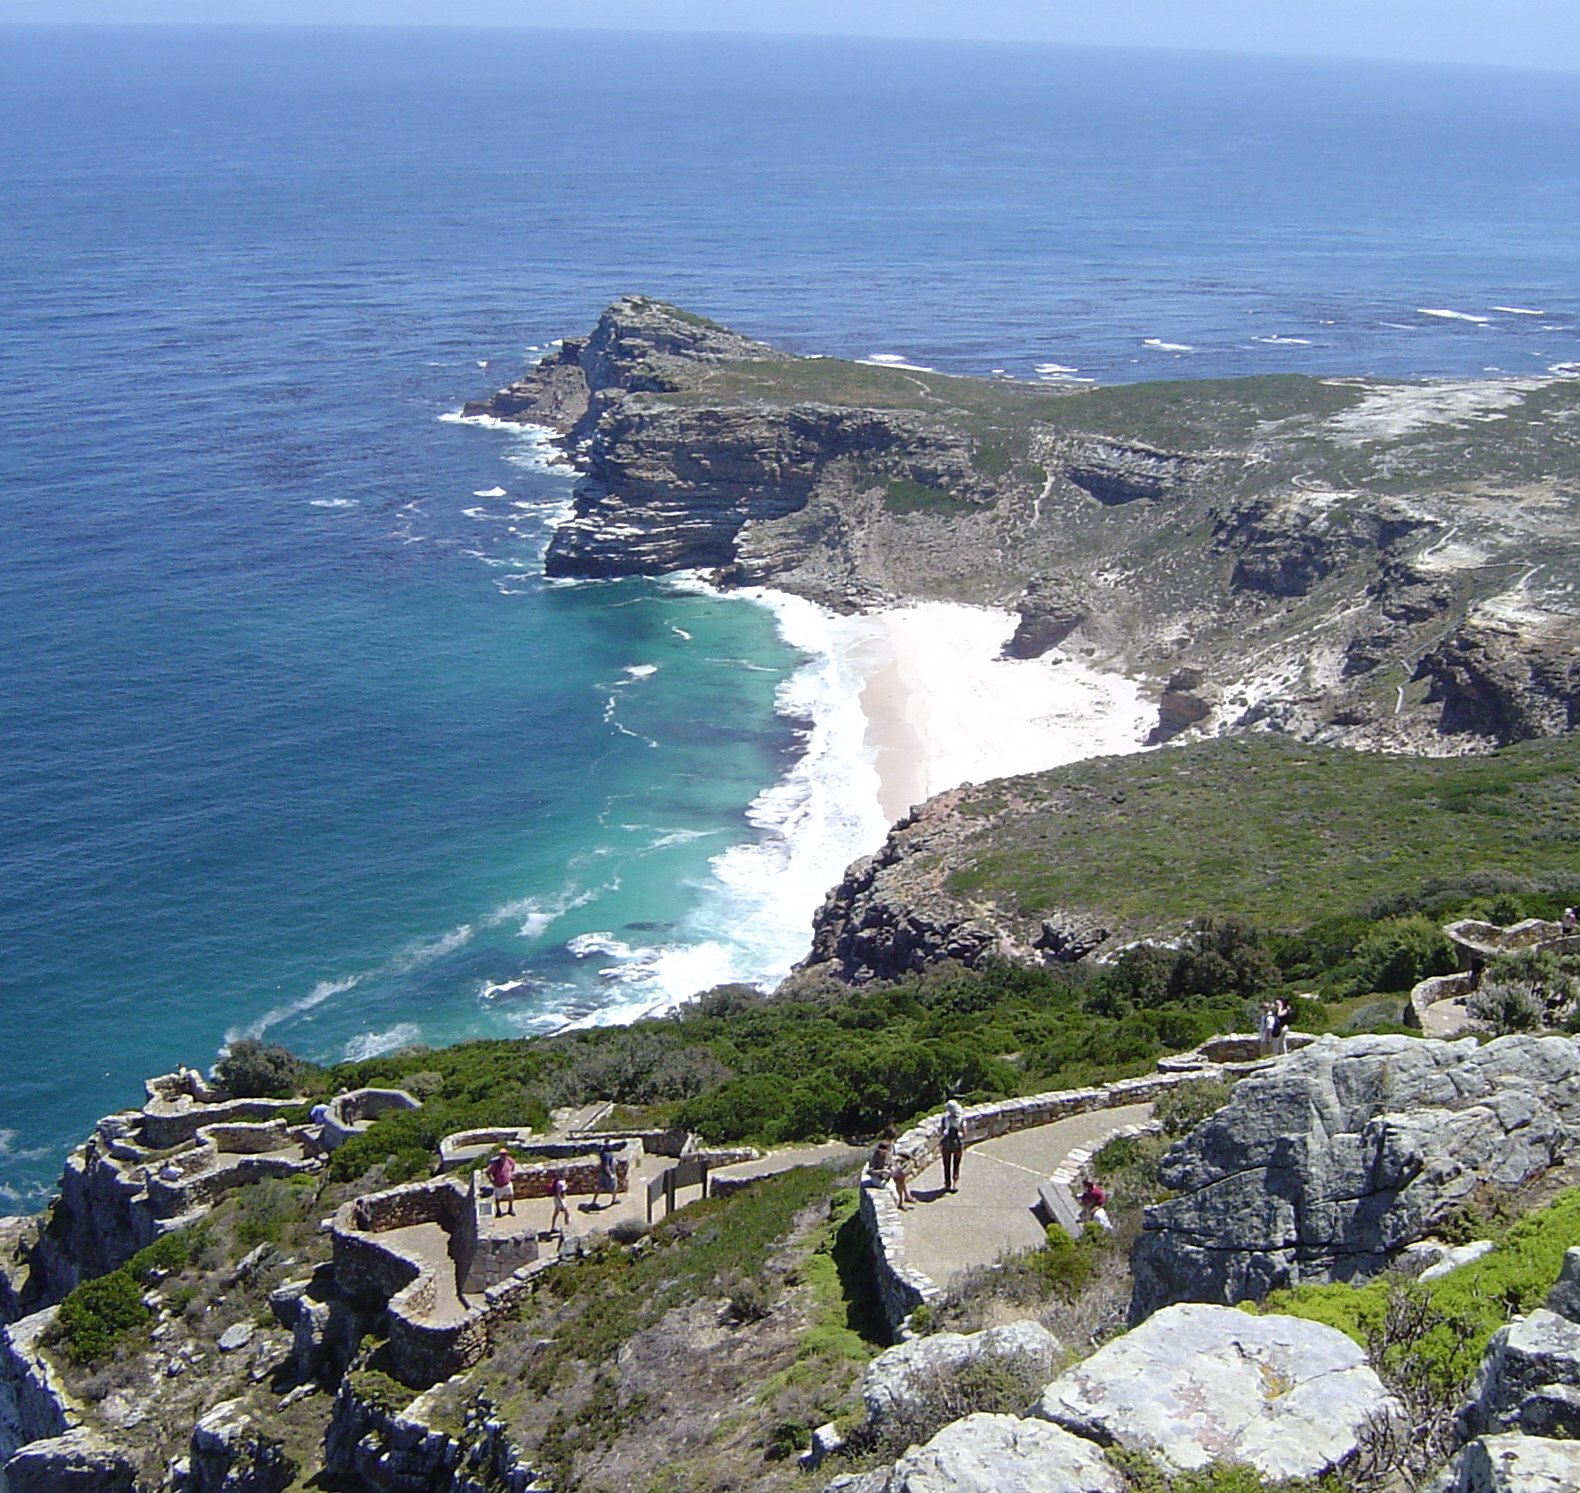 Cape Point - Cape of Good Hope